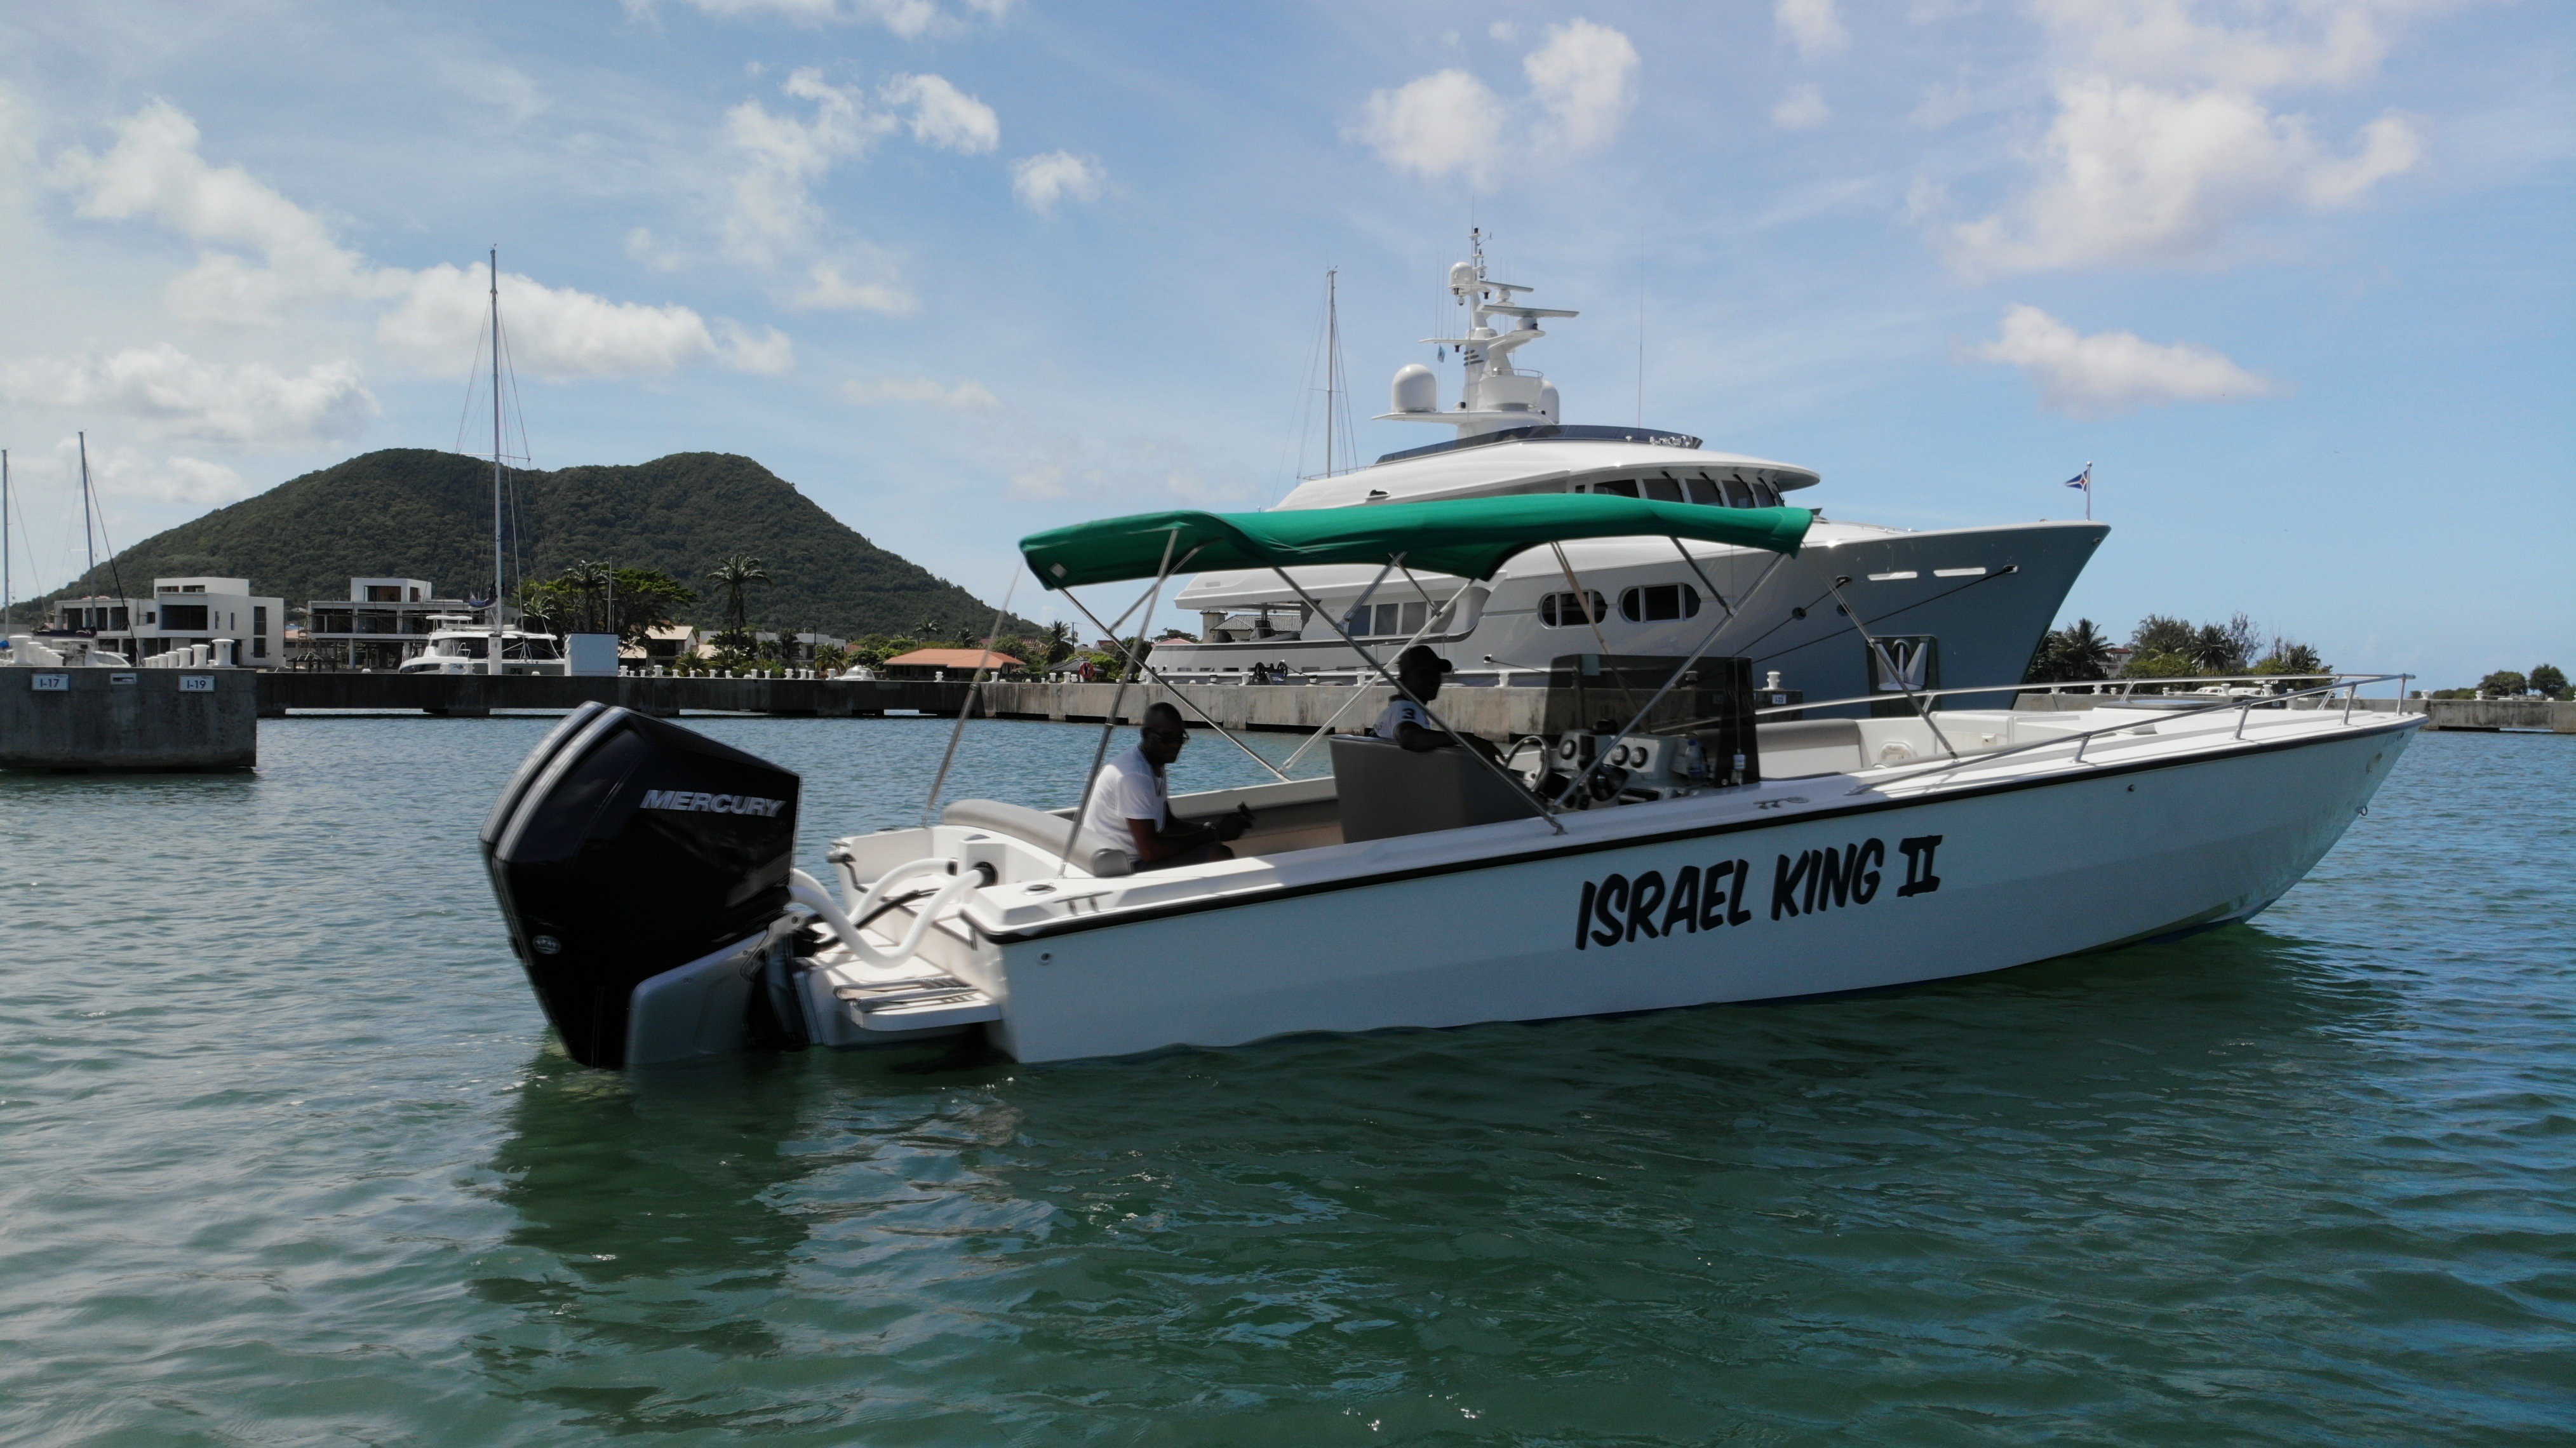 Private Speed Boat Full Day Charter to Soufriere in Saint Lucia